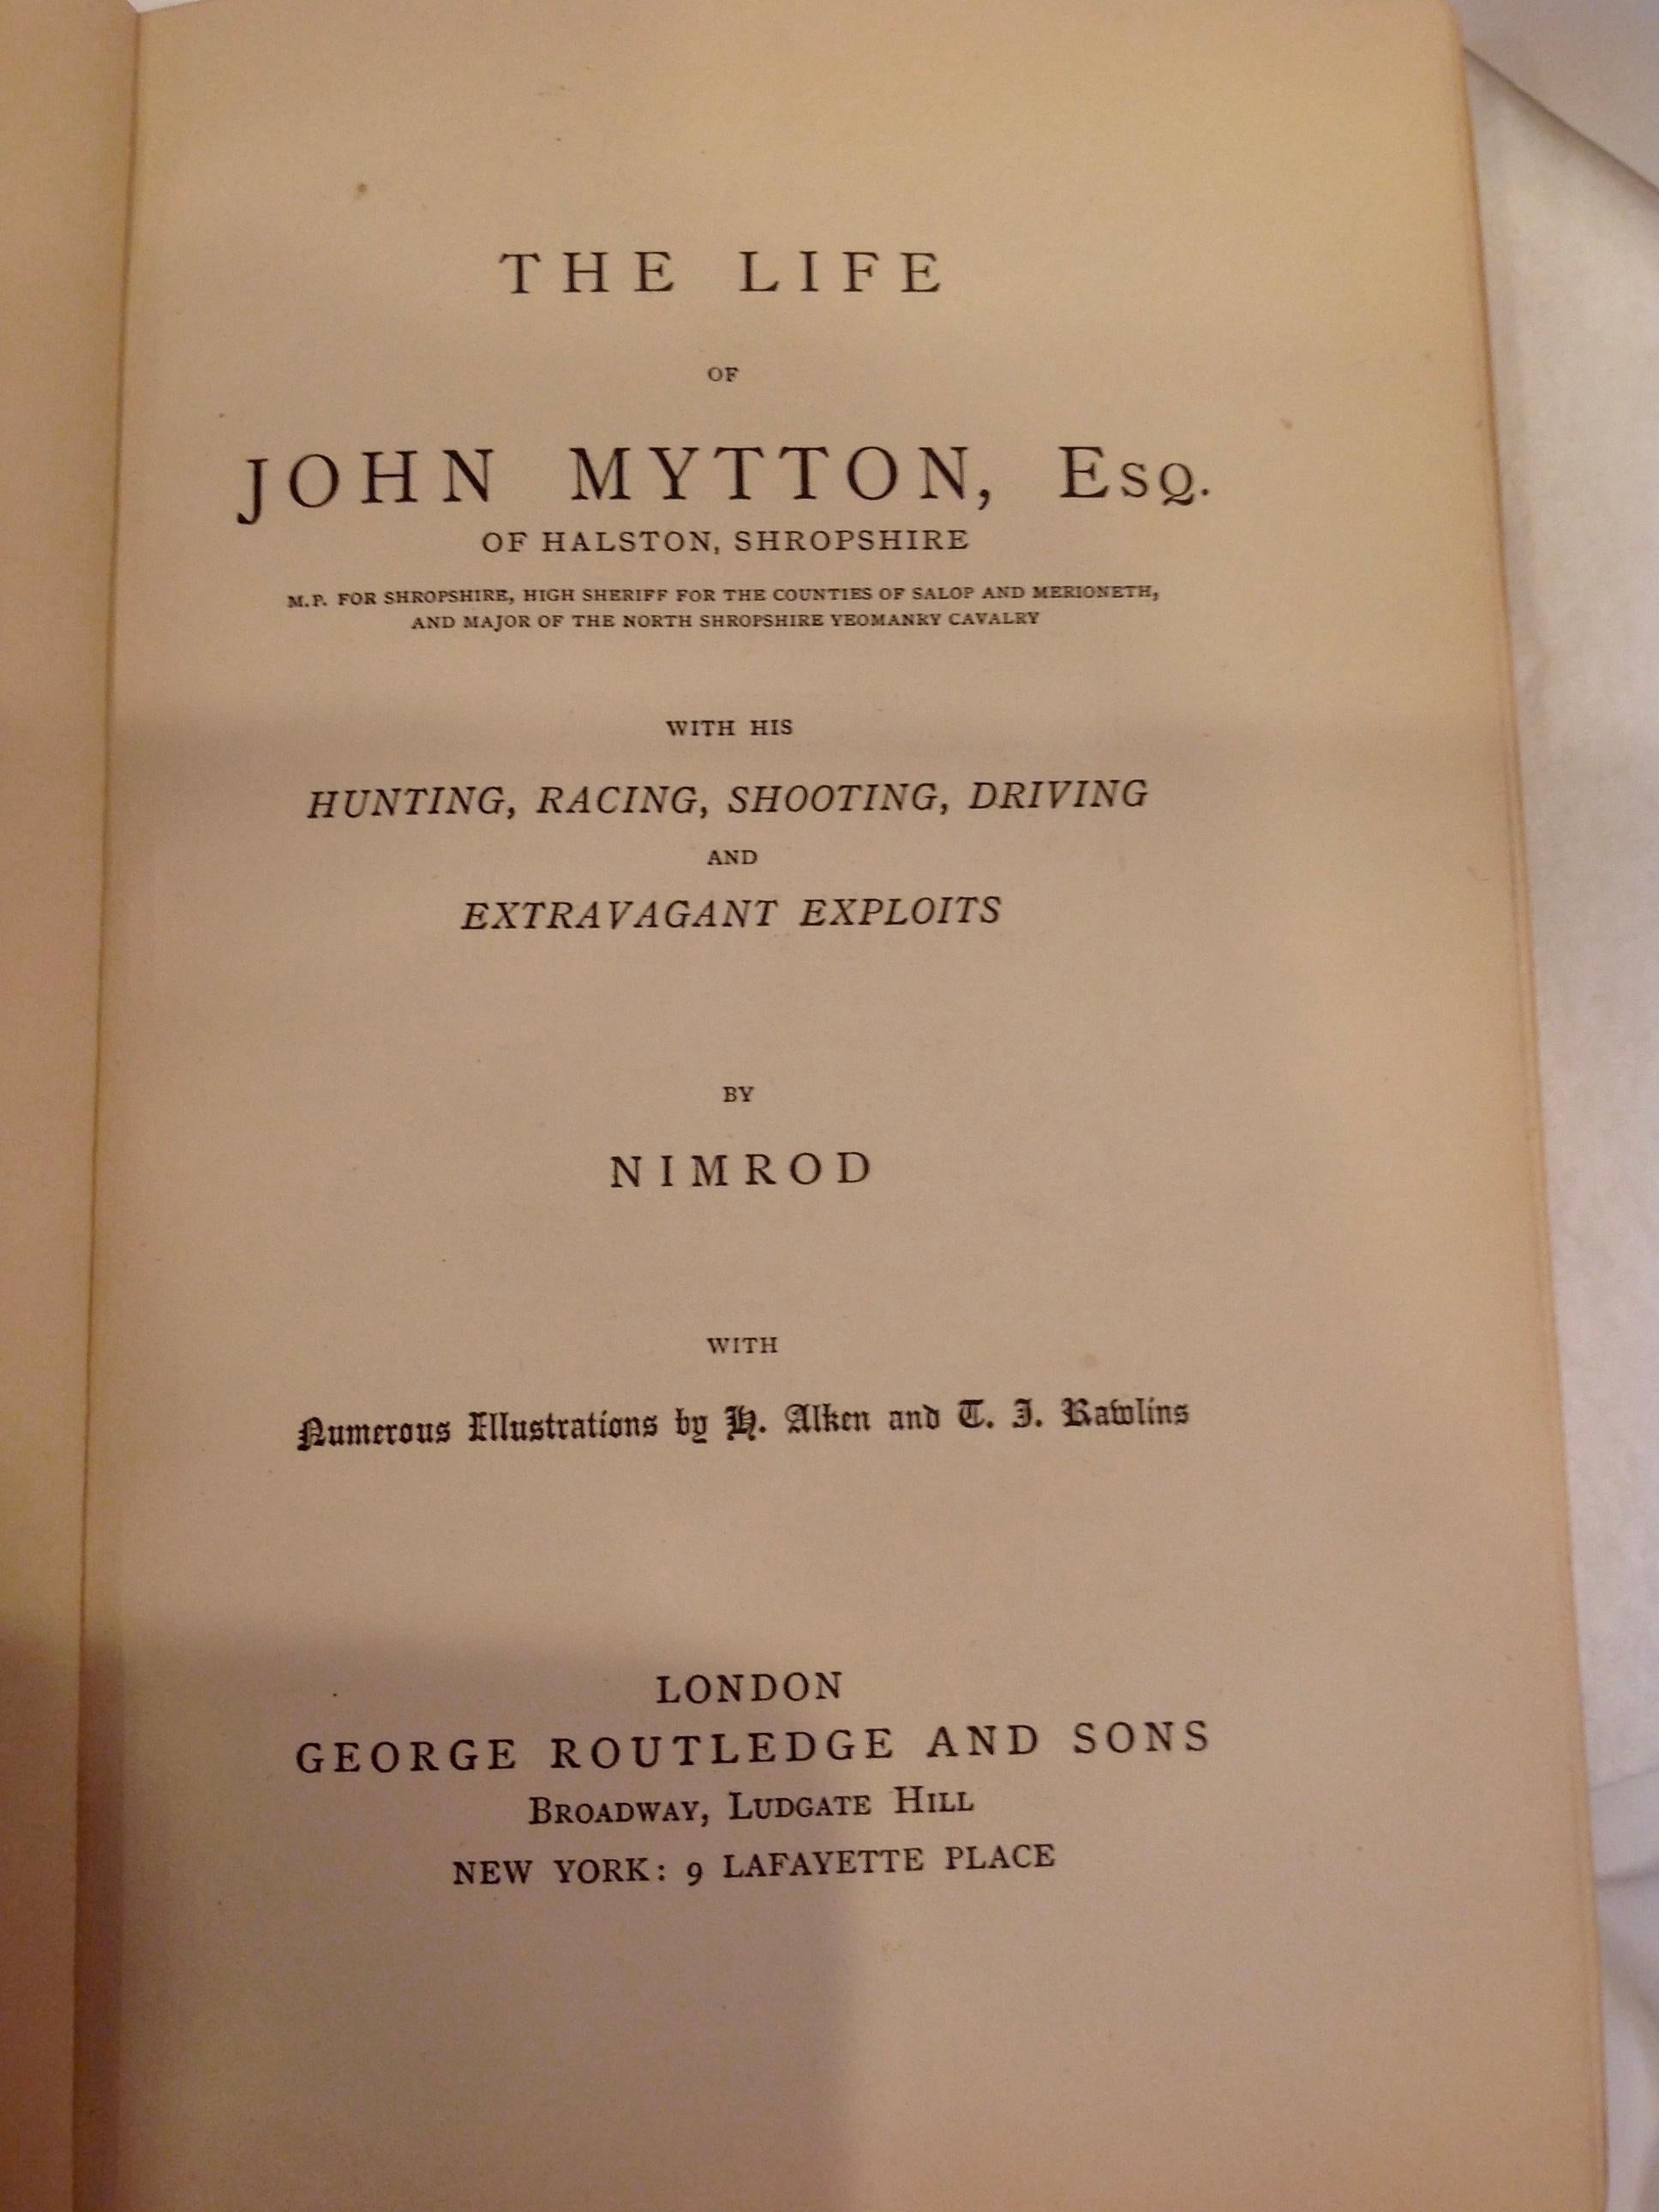 Book, A Fine Binding The Life of John Mytton, Esq. In Good Condition For Sale In West Palm Beach, FL